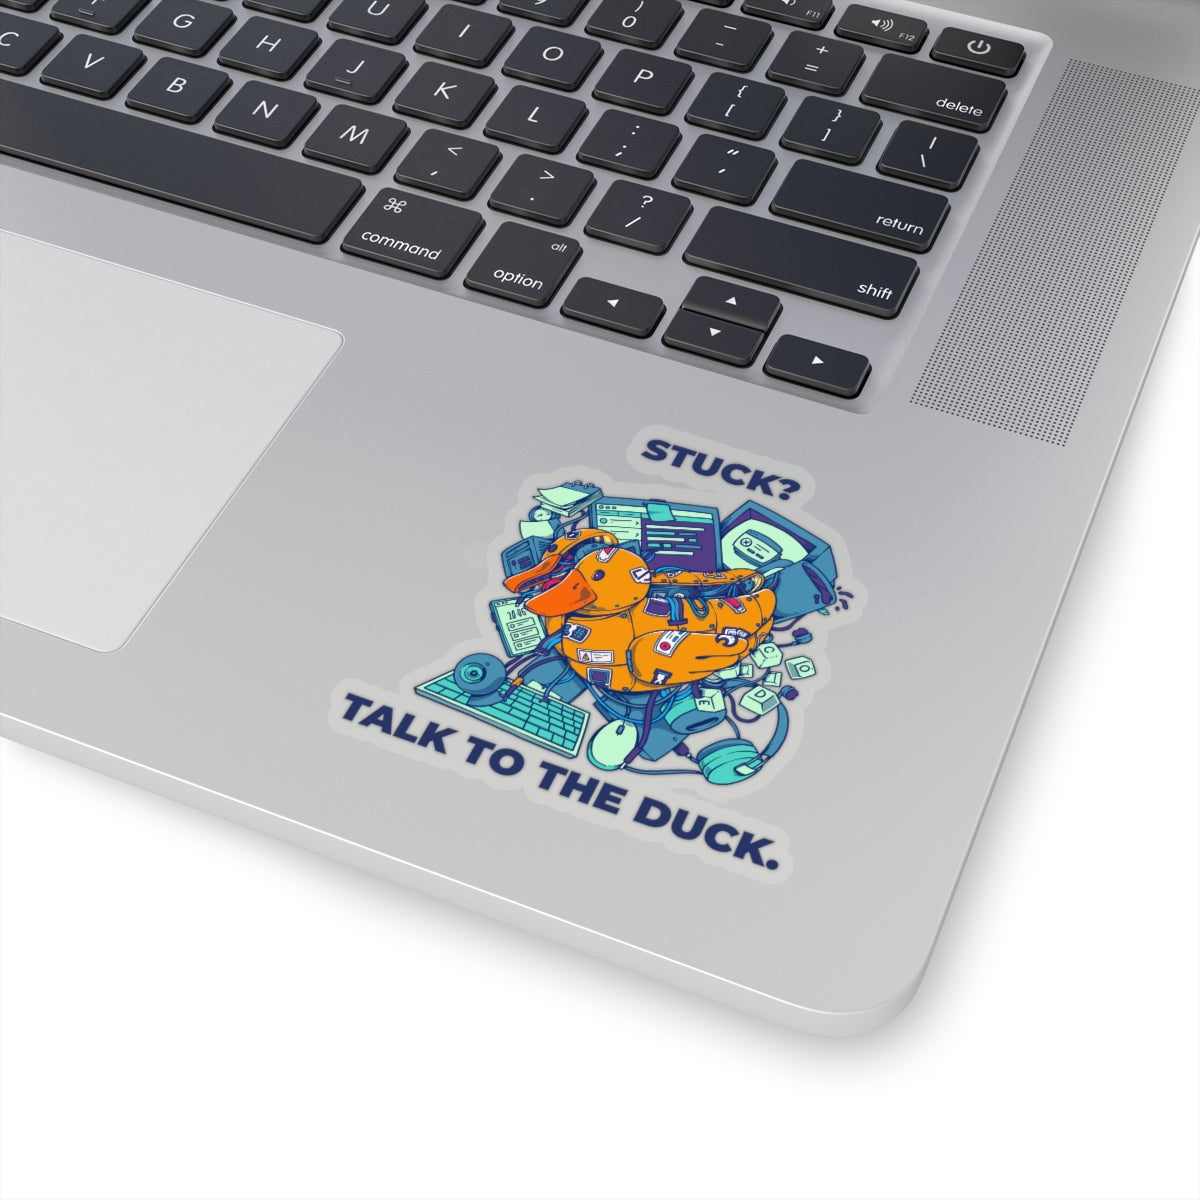 Stuck Debugging? Talk to the Cyber Duck Sticker™